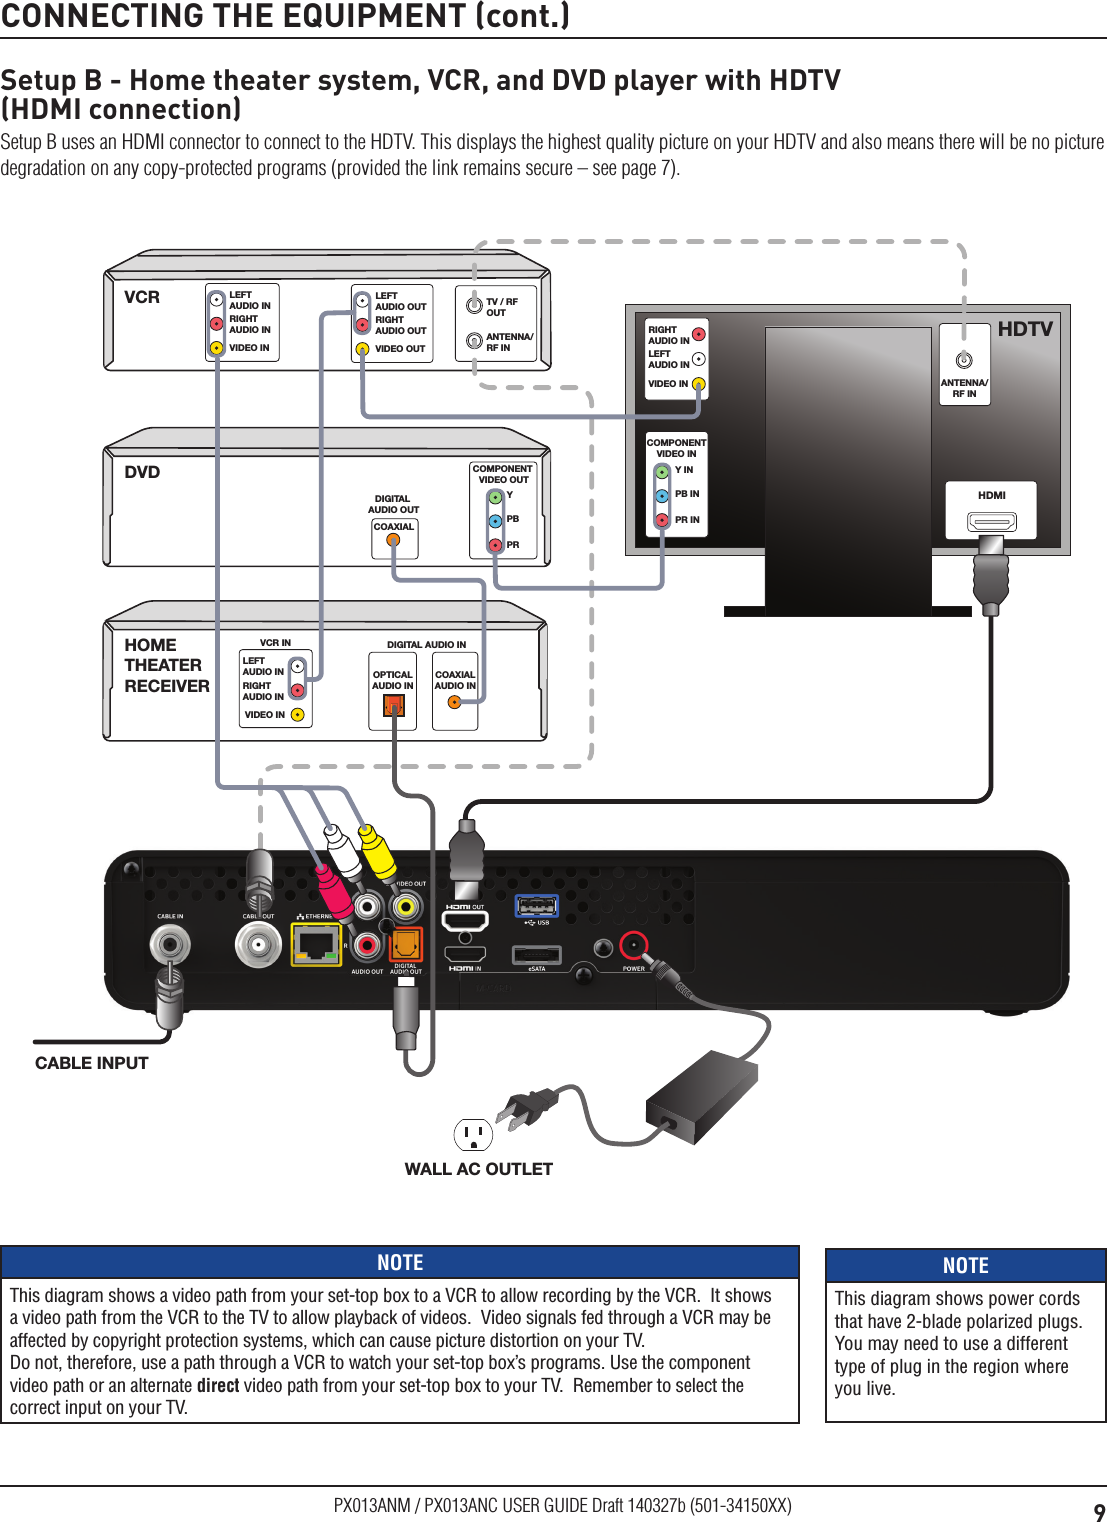 9PX013ANM / PX013ANC USER GUIDE Draft 140327b (501-34150XX)CONNECTING THE EQUIPMENT (cont.)Setup B - Home theater system, VCR, and DVD player with HDTV  (HDMI connection)Setup B uses an HDMI connector to connect to the HDTV. This displays the highest quality picture on your HDTV and also means there will be no picture degradation on any copy-protected programs (provided the link remains secure – see page 7).VCRDVDPBPRYCOMPONENT VIDEO OUTDIGITAL AUDIO OUTCOAXIALANTENNA/RF INTV / RF OUTLEFTAUDIO OUTRIGHTAUDIO OUTVIDEO OUTLEFTAUDIO INRIGHTAUDIO INVIDEO INOPTICALAUDIO INCOAXIALAUDIO INDIGITAL AUDIO INHOME THEATER RECEIVERLEFTAUDIO INVCR INRIGHTAUDIO INVIDEO INANTENNA/RF INHDMIPB INPR INY INCOMPONENTVIDEO INLEFTAUDIO INRIGHTAUDIO INVIDEO INHDTVWALL AC OUTLETCABLE INPUTNOTEThis diagram shows a video path from your set-top box to a VCR to allow recording by the VCR.  It shows a video path from the VCR to the TV to allow playback of videos.  Video signals fed through a VCR may be affected by copyright protection systems, which can cause picture distortion on your TV.   Do not, therefore, use a path through a VCR to watch your set-top box’s programs. Use the component video path or an alternate direct video path from your set-top box to your TV.  Remember to select the correct input on your TV.NOTEThis diagram shows power cords that have 2-blade polarized plugs. You may need to use a different type of plug in the region where you live.